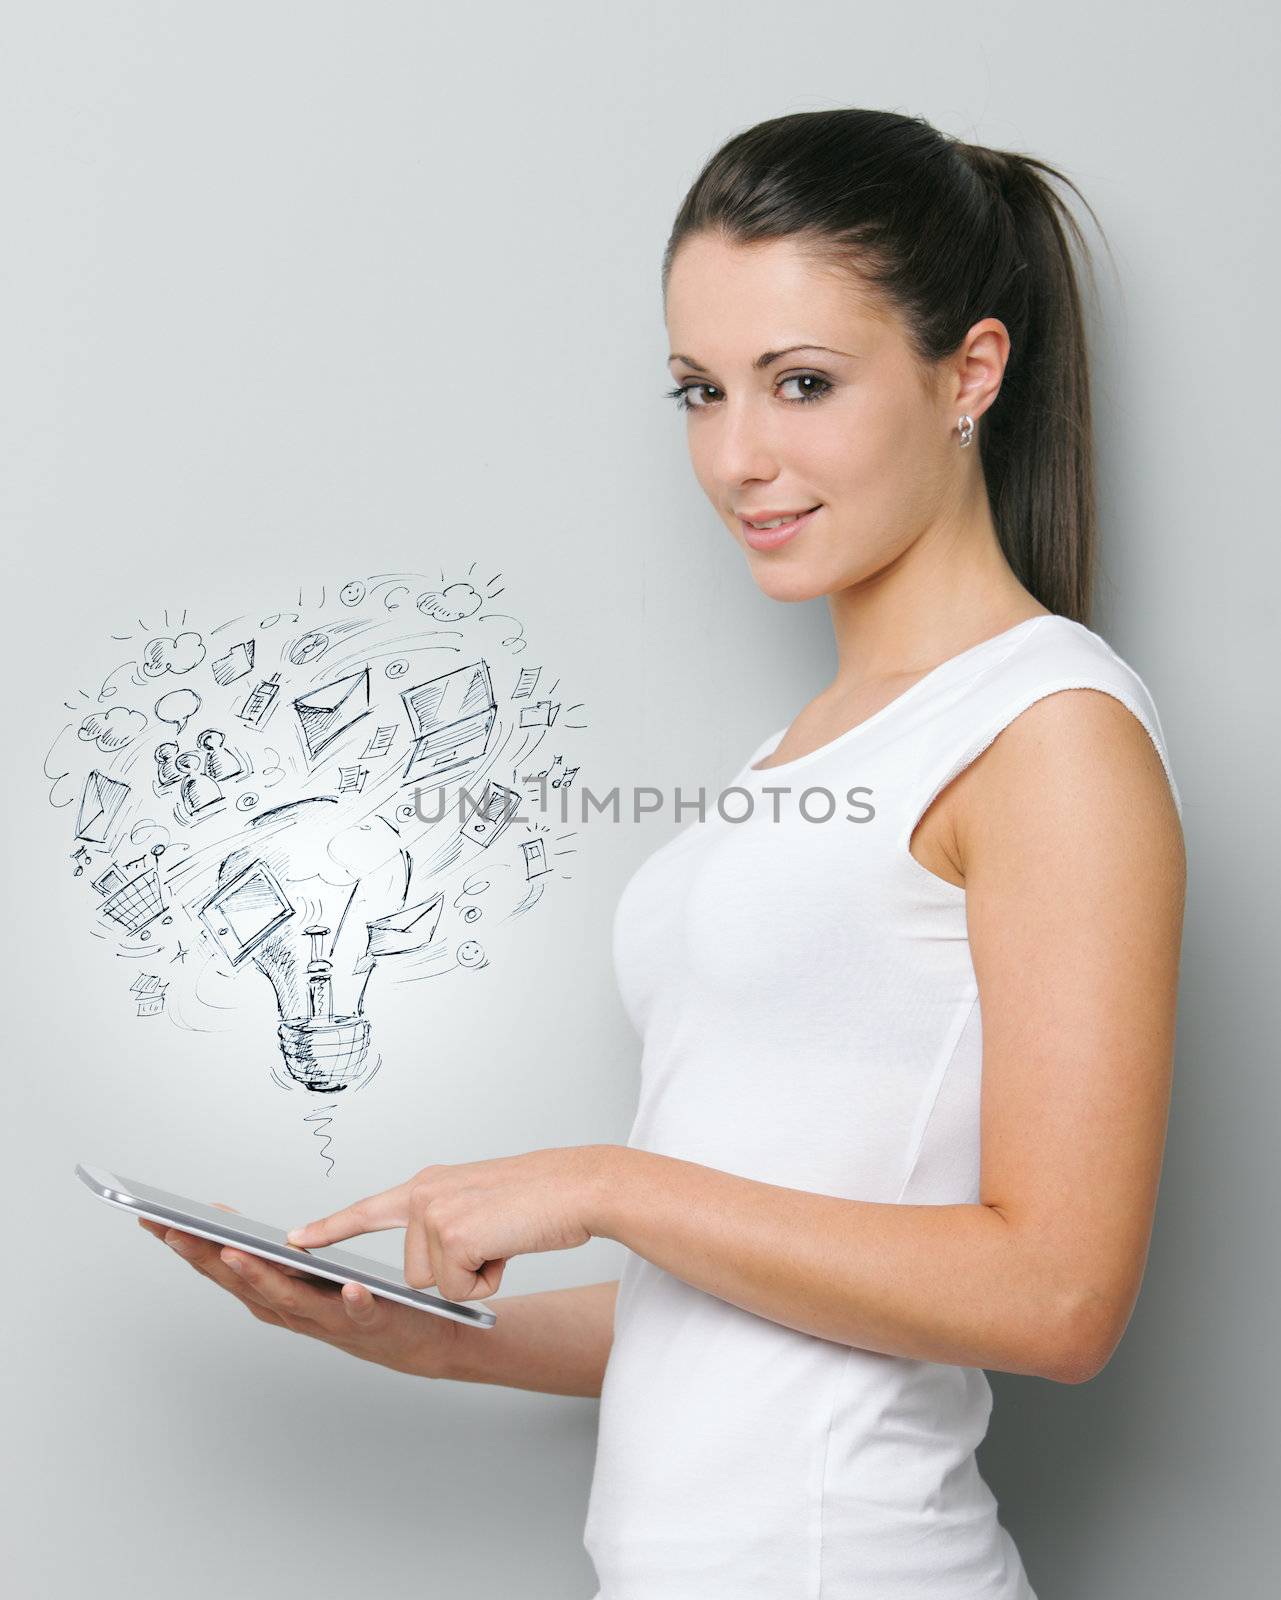 A beautiful young woman working on her digital touchpad 